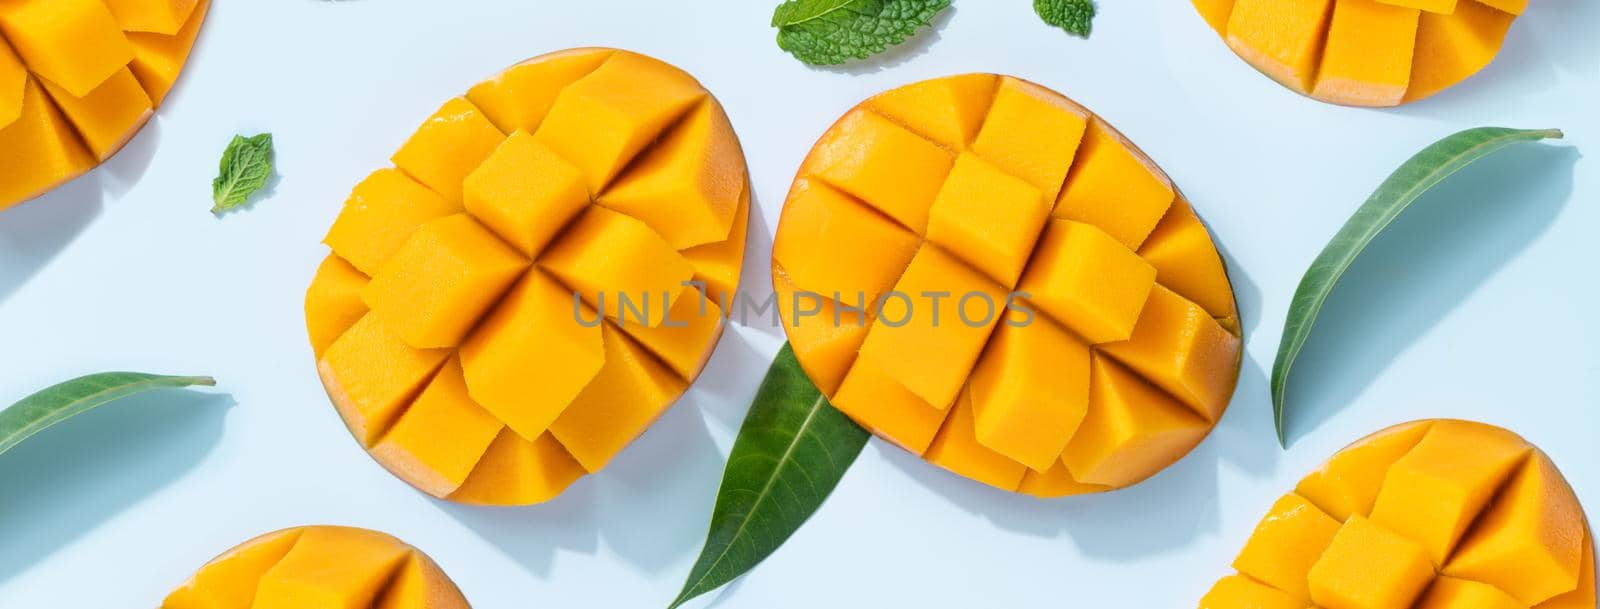 Mango design concept. Top view of diced fresh mango fruit pattern on blue table background.